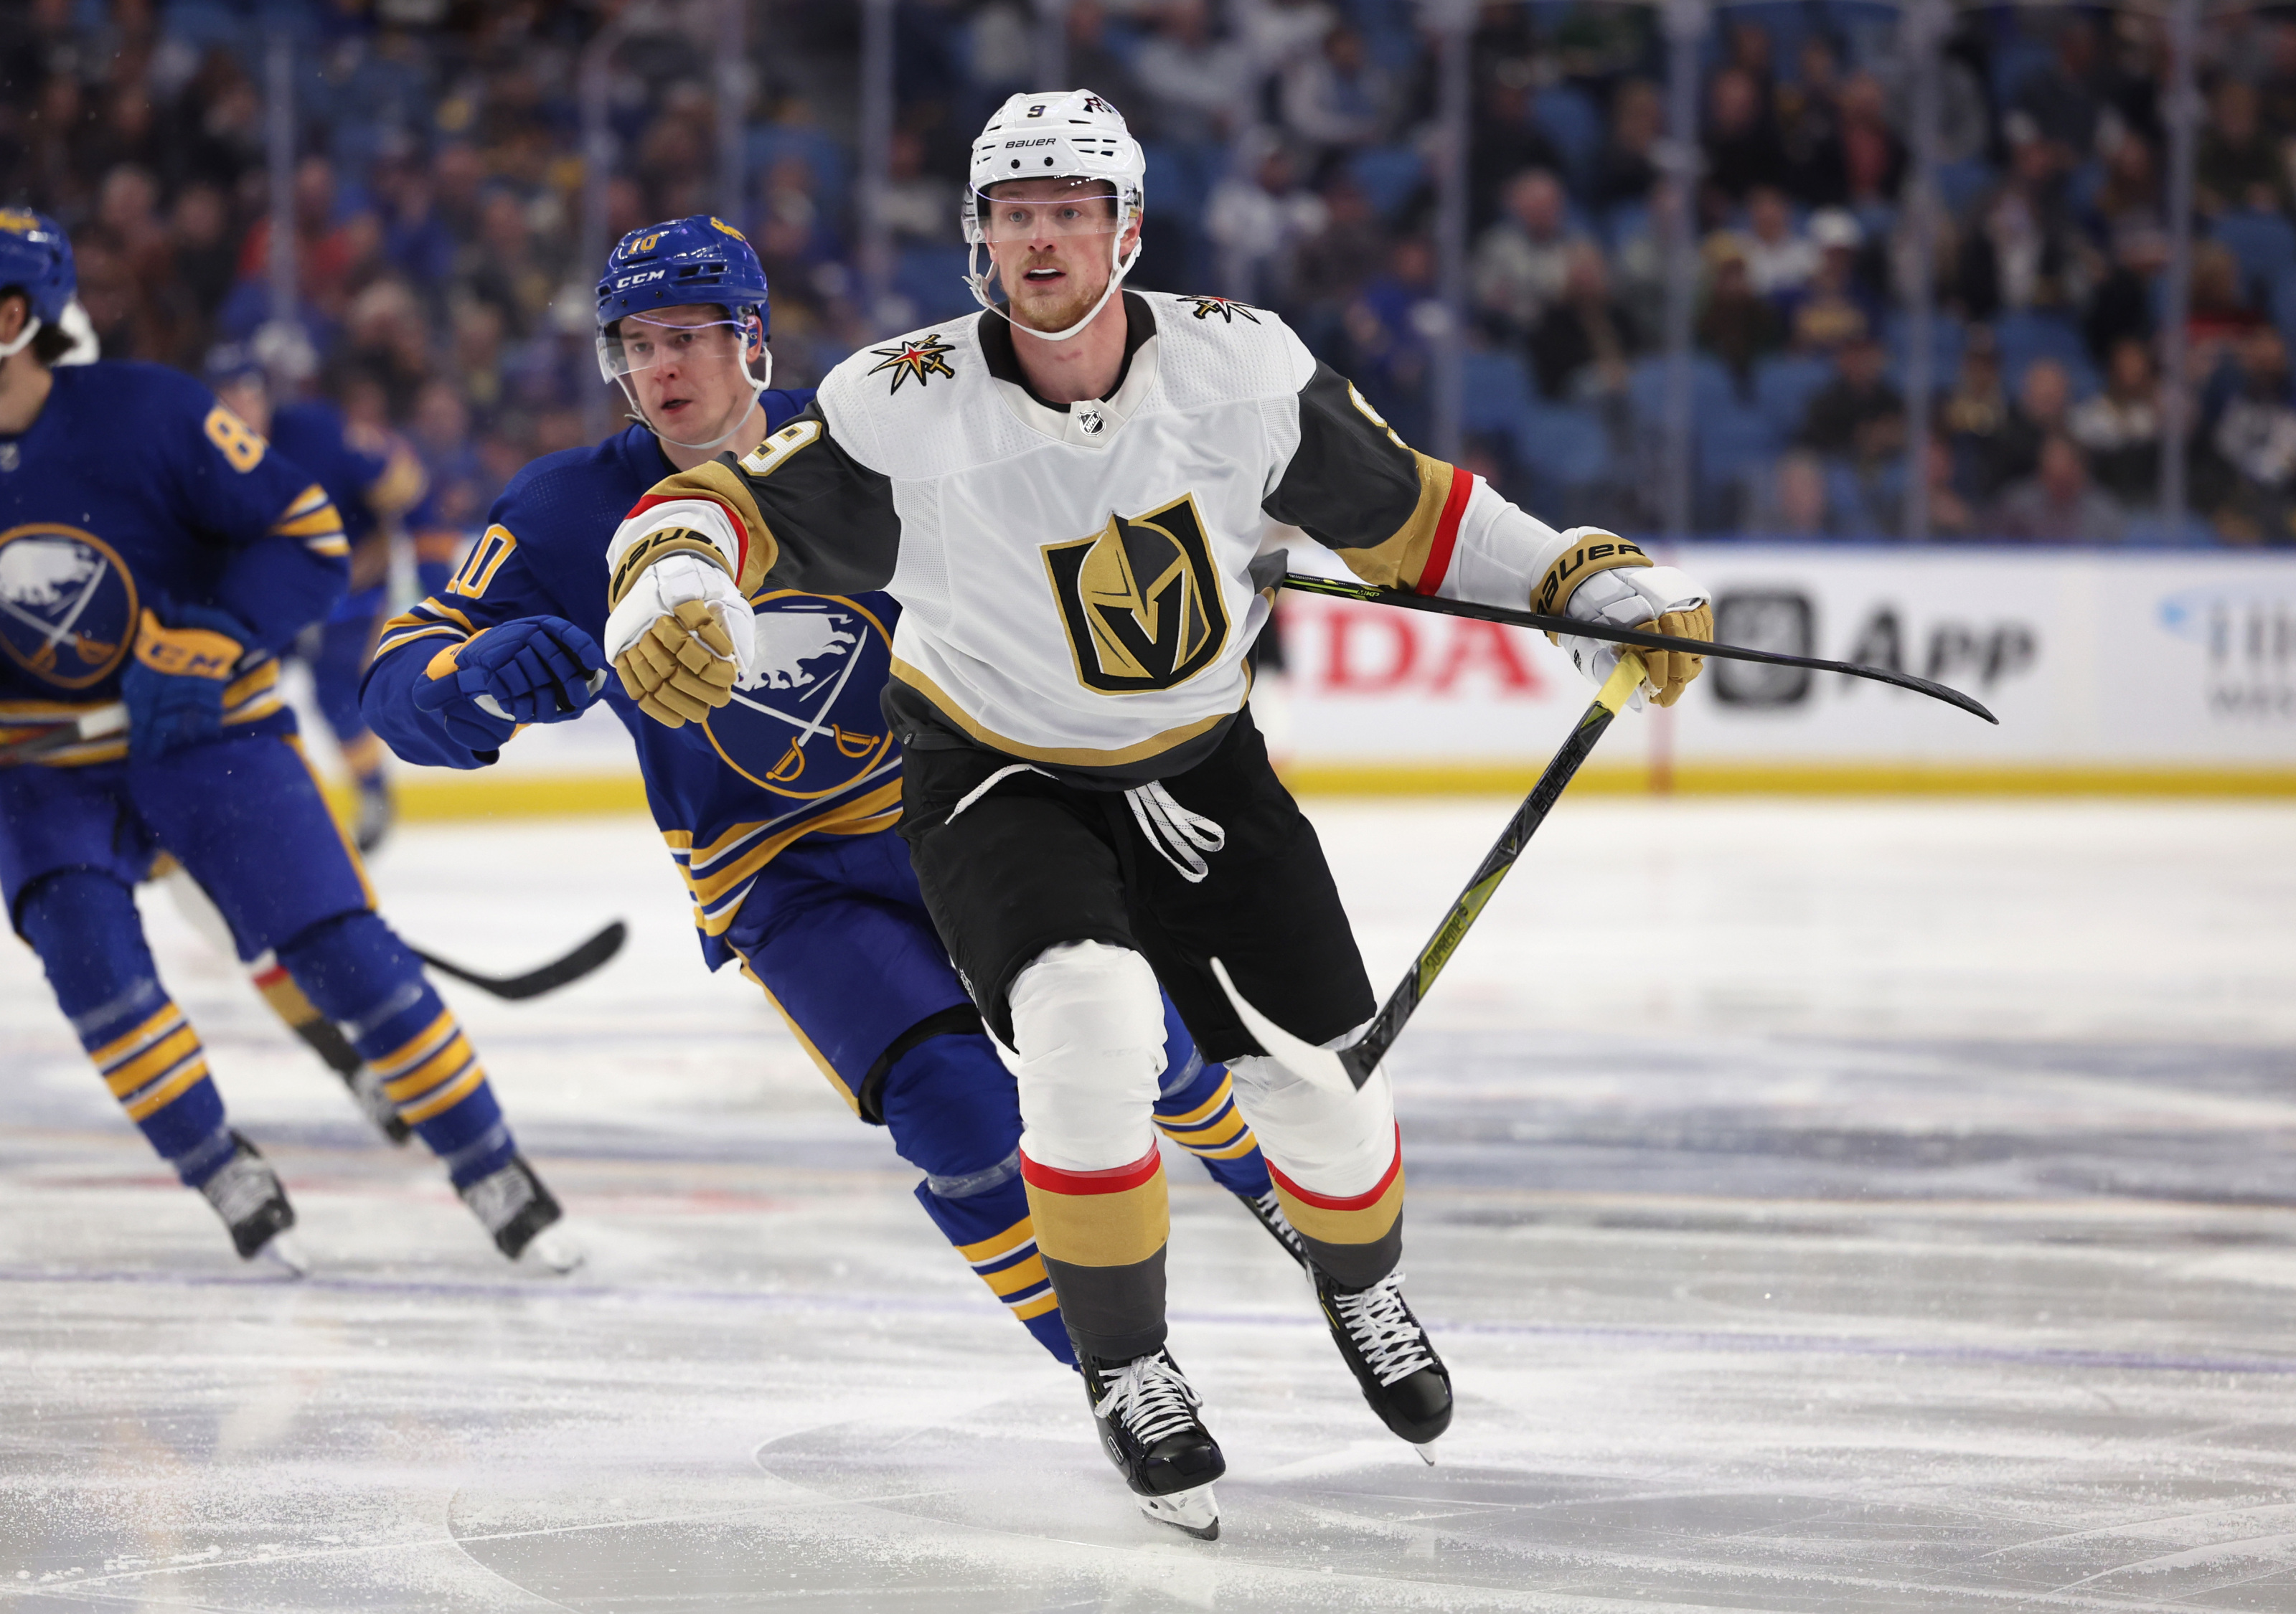 Jack Eichel to arrive in Las Vegas this week, join Golden Knights